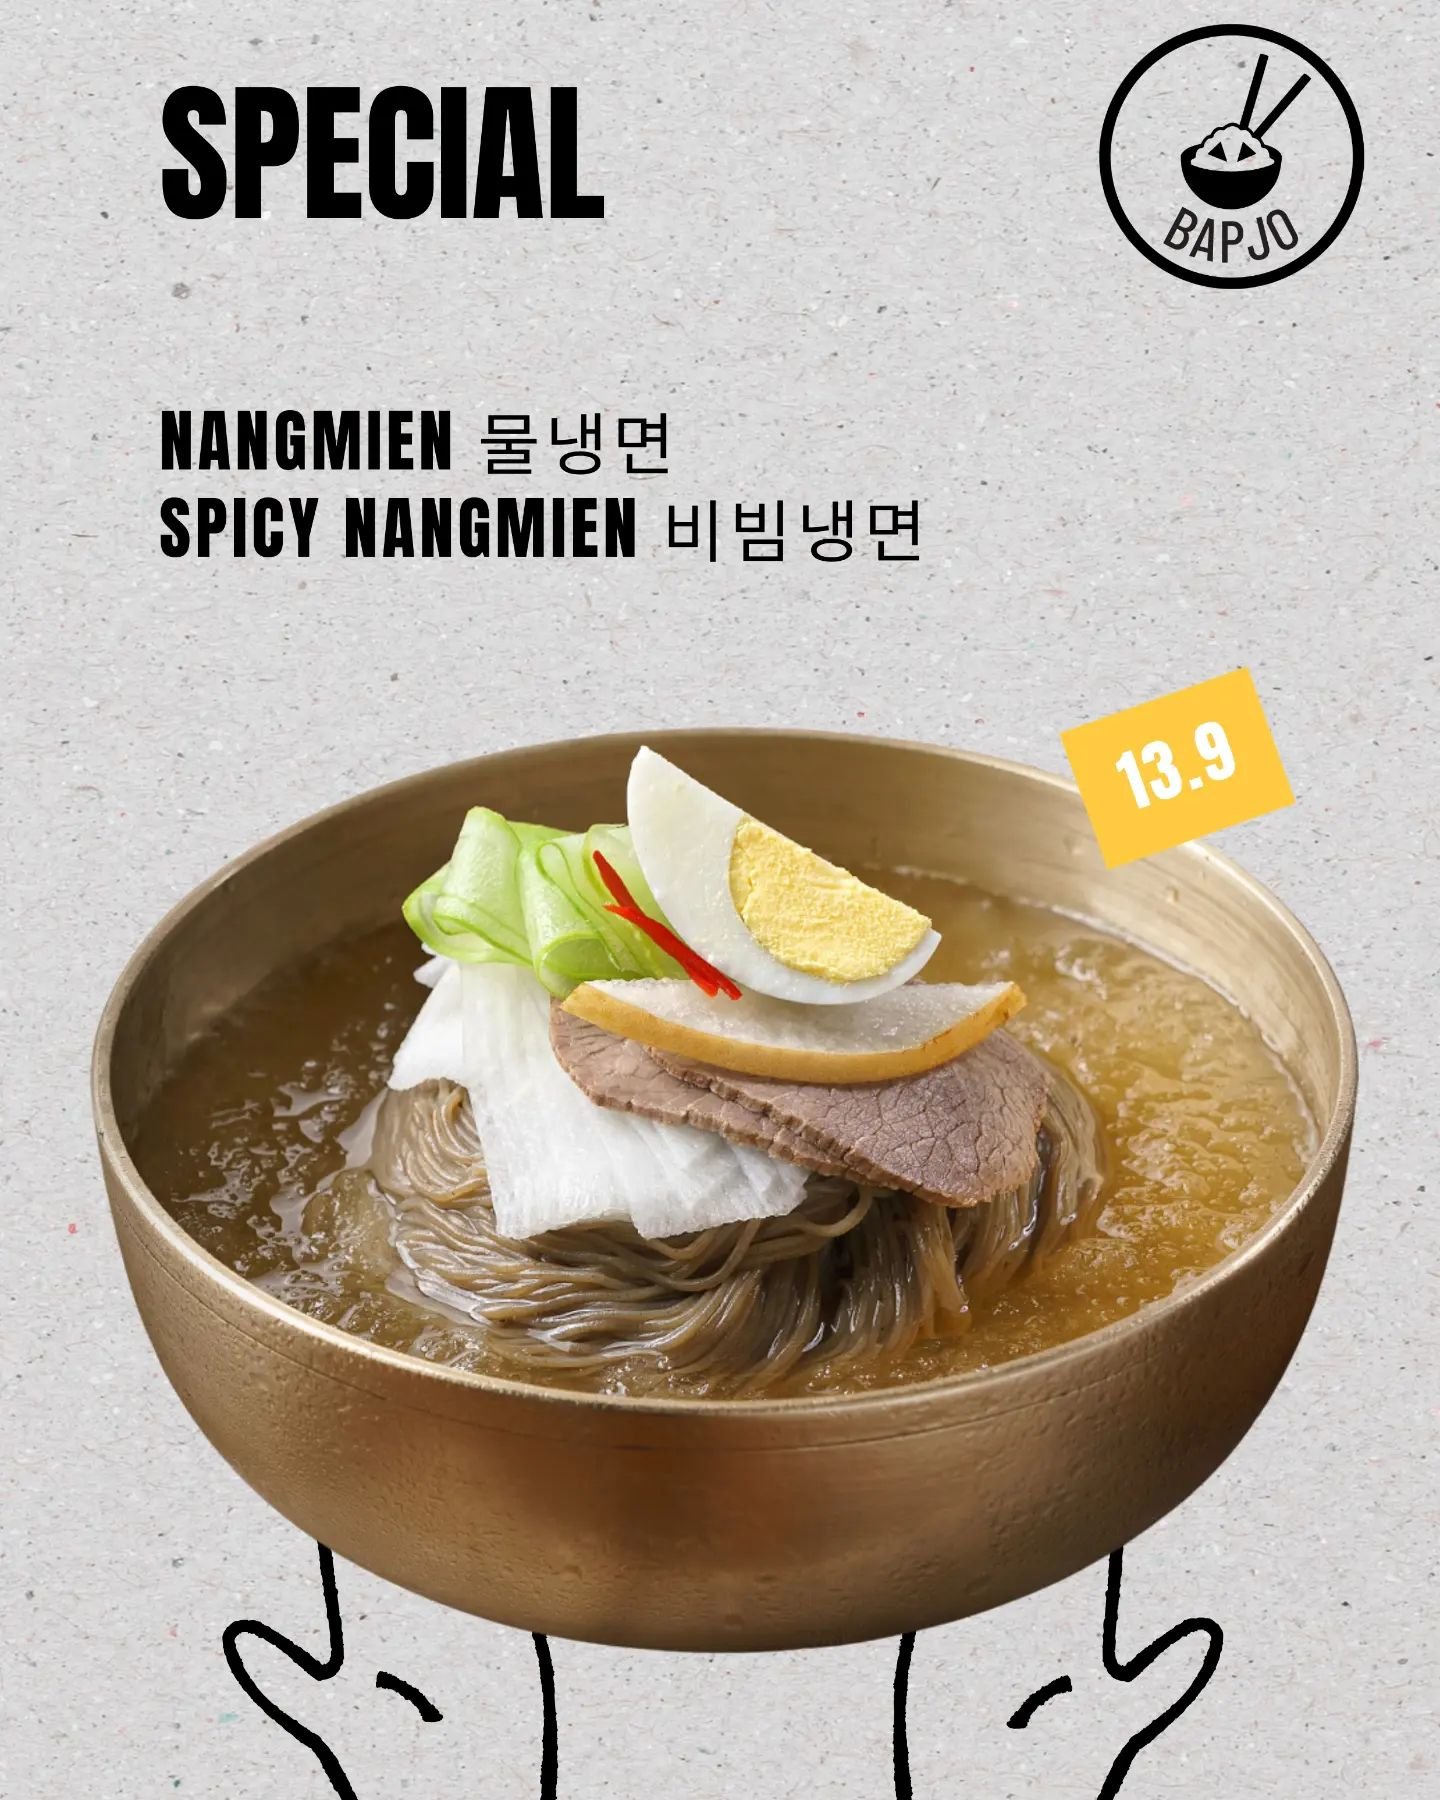 Nangmien (냉면) translates to cold noodles in Korean. These dishes are popular in both North &amp; South Korea in the hot summer months. The thin elastic noodles are made from buckwheat and potato starch. The broth is made from beef &amp; veggie and is